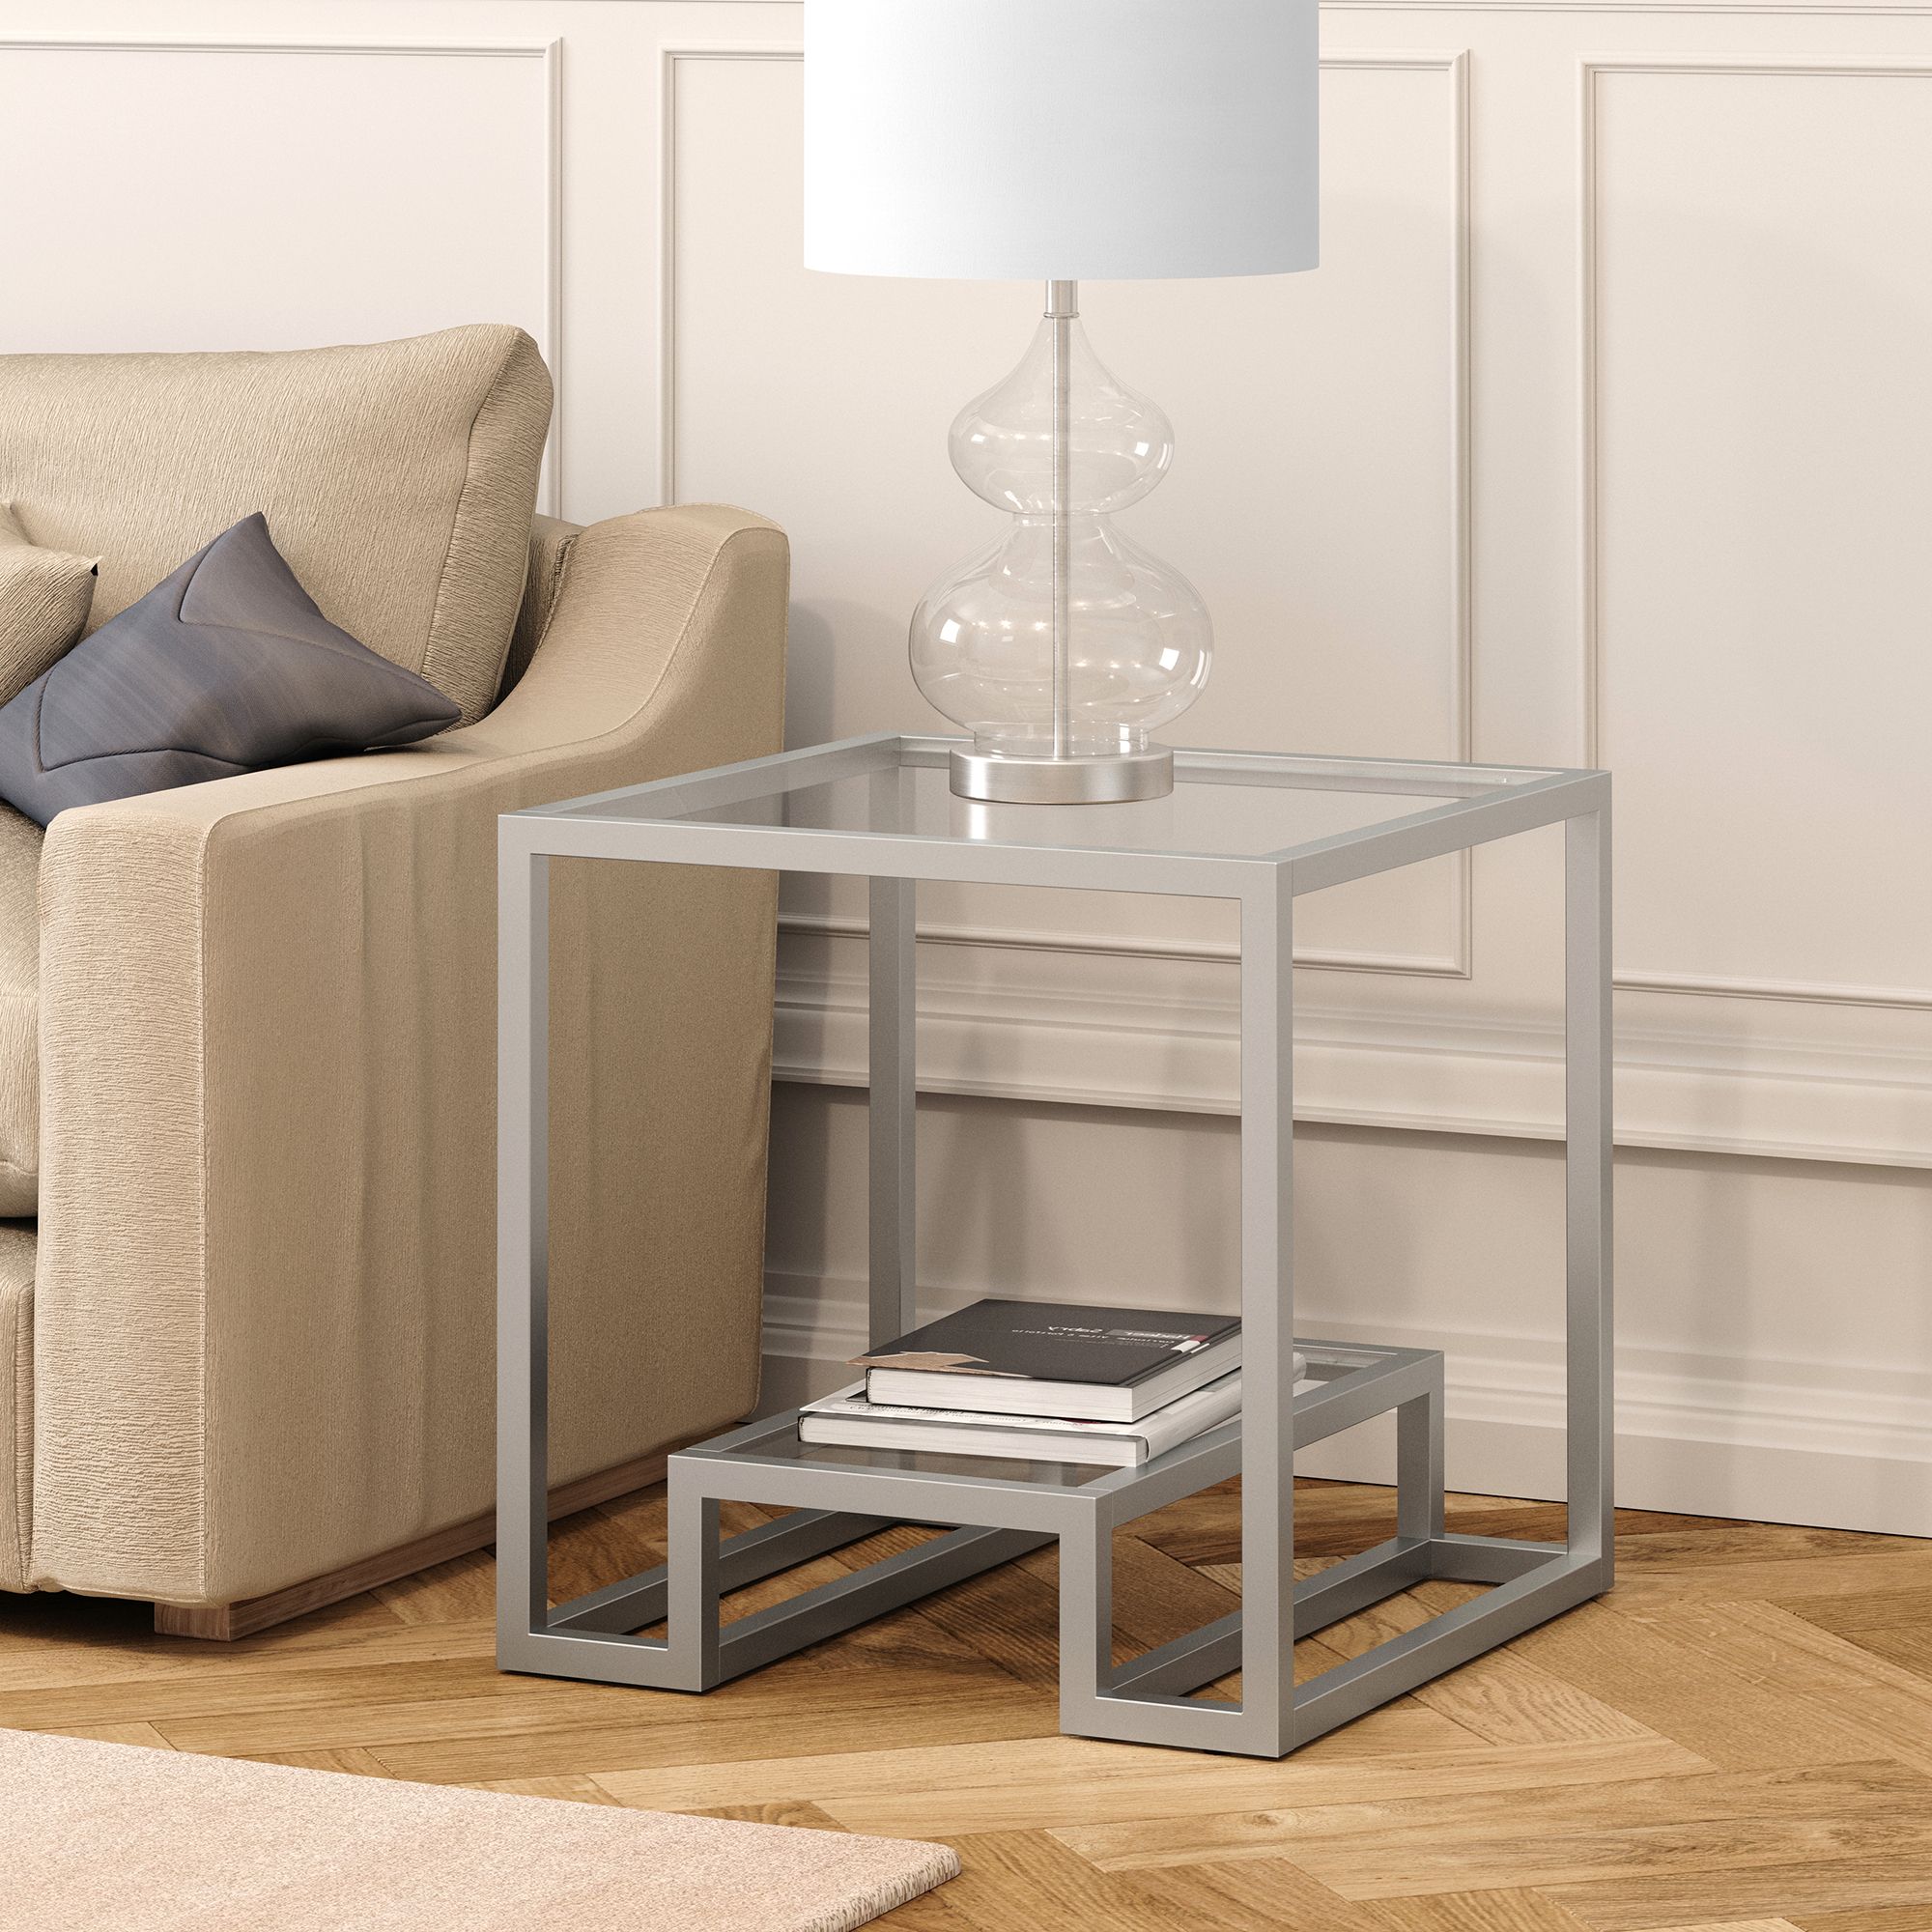 Athena Geometric Glam Side Table In Silver – Walmart In 2020 Athena Glam Geometric Coffee Tables (View 11 of 20)